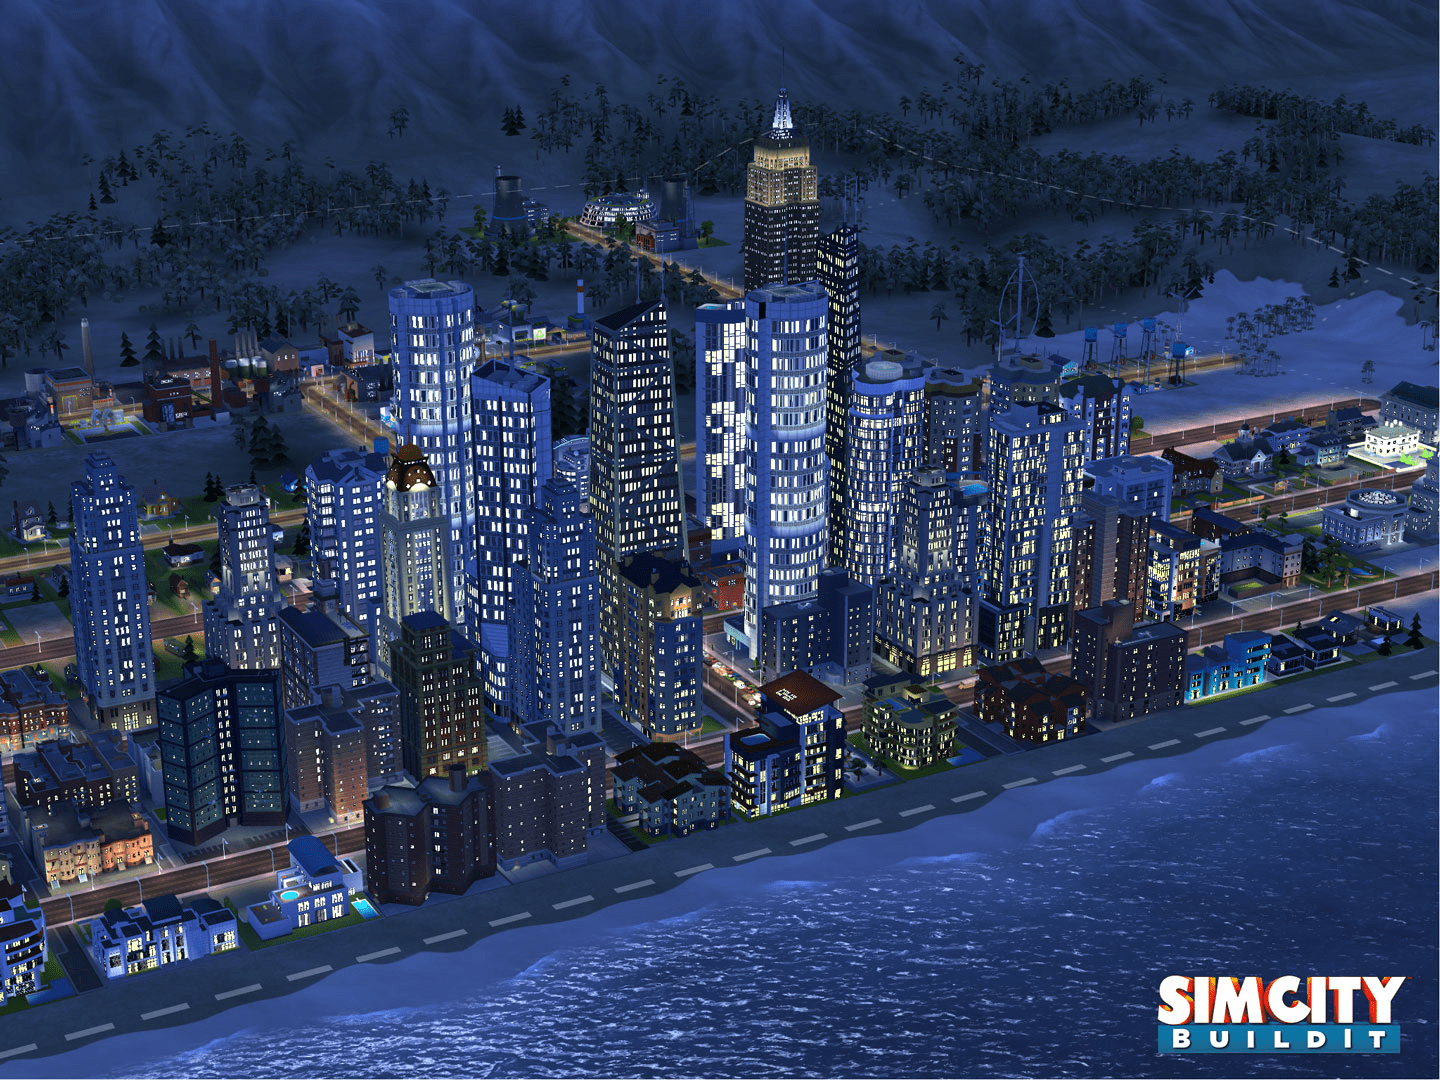 There’s A New SimCity Game Coming To Mobile